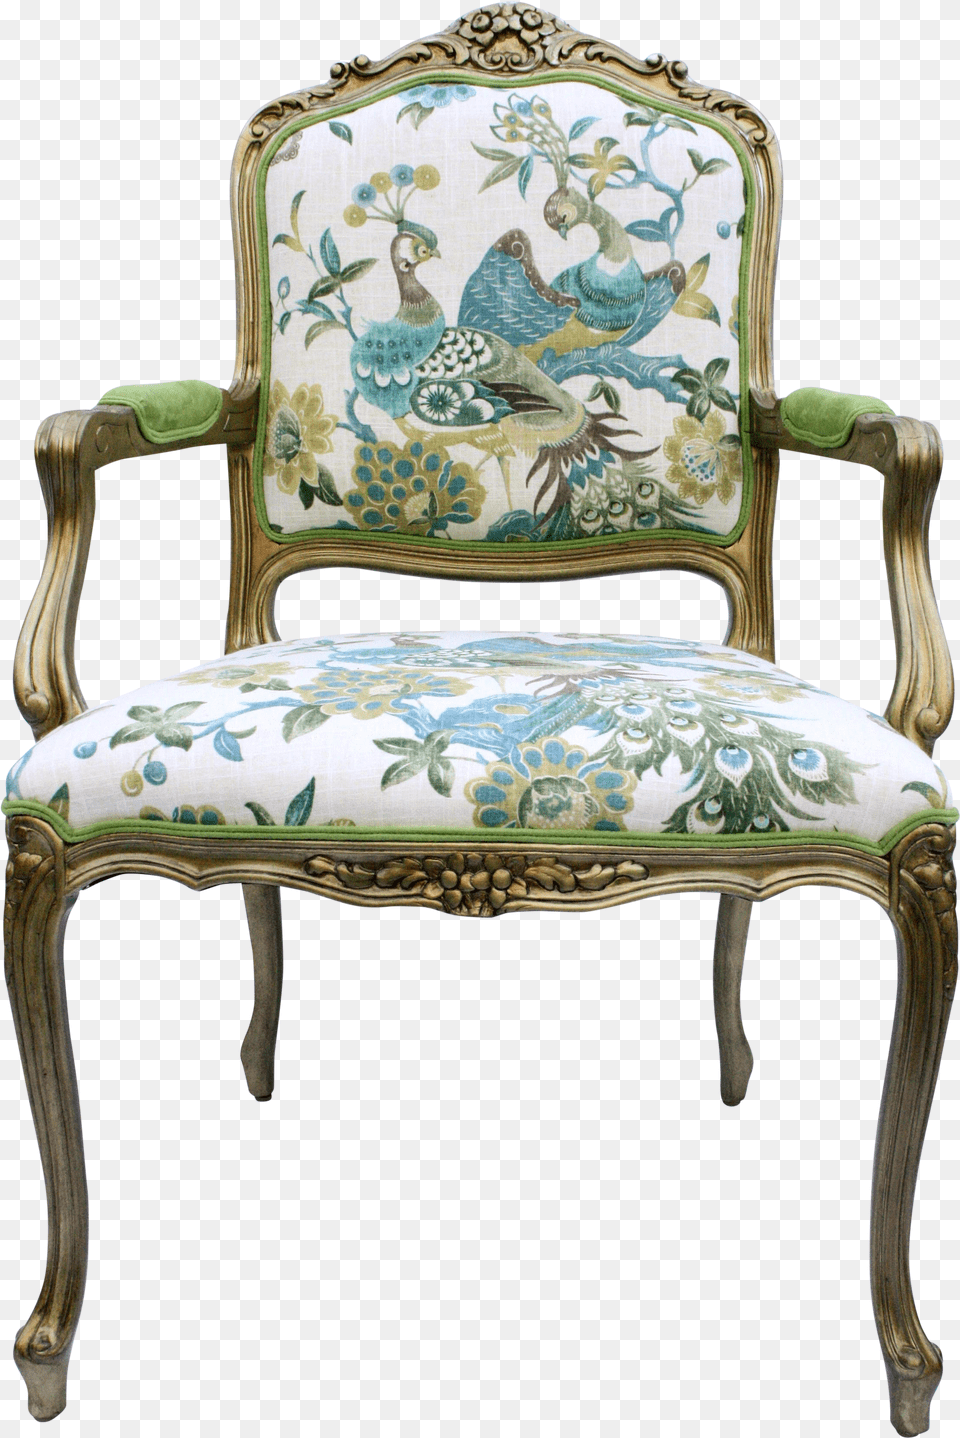 Gold Leaf Victorian Turquoise Peacock Arm Chair For Preen Papaya Linen Fabric By The Yard Png Image